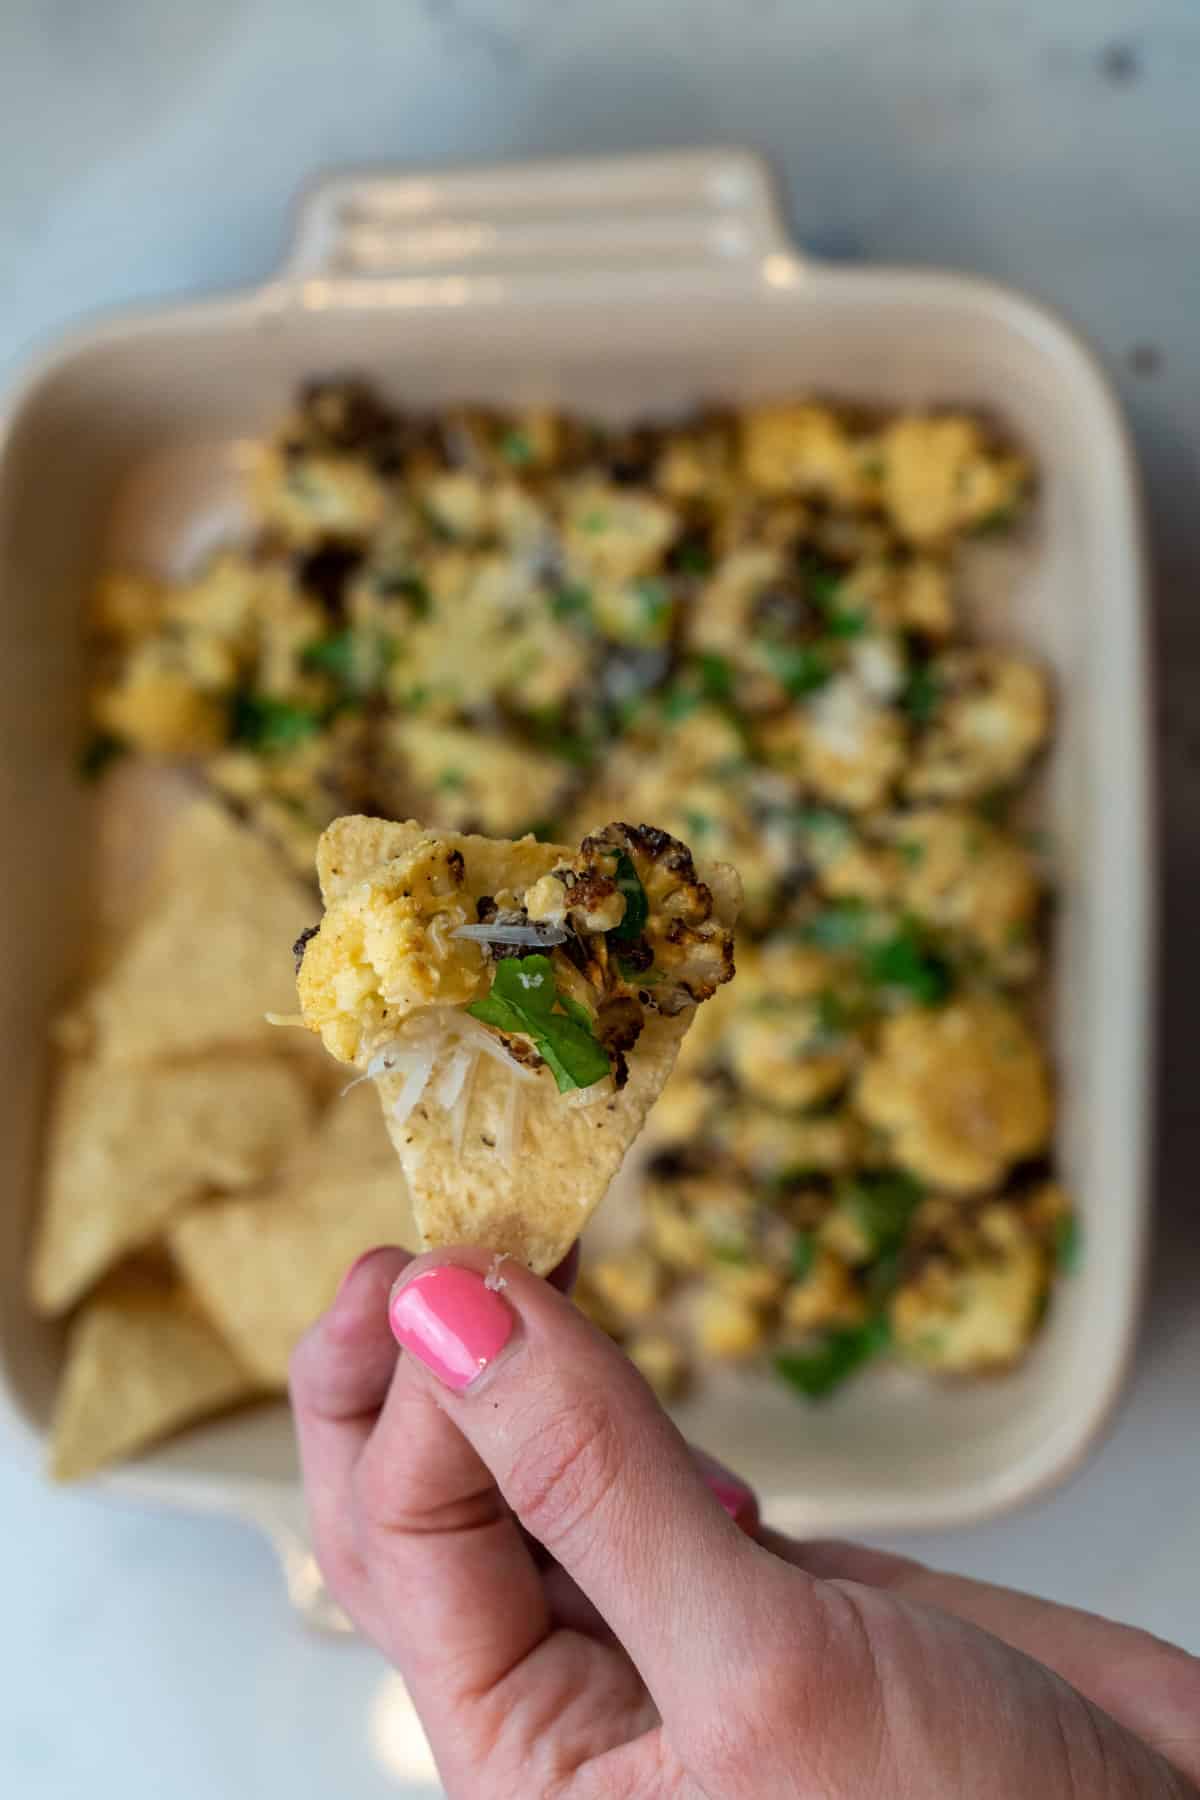 This Mexican Street Style Cauliflower Recipe is made with cauliflower, sour cream, mayonnaise, hot sauce, limes, and cheese.